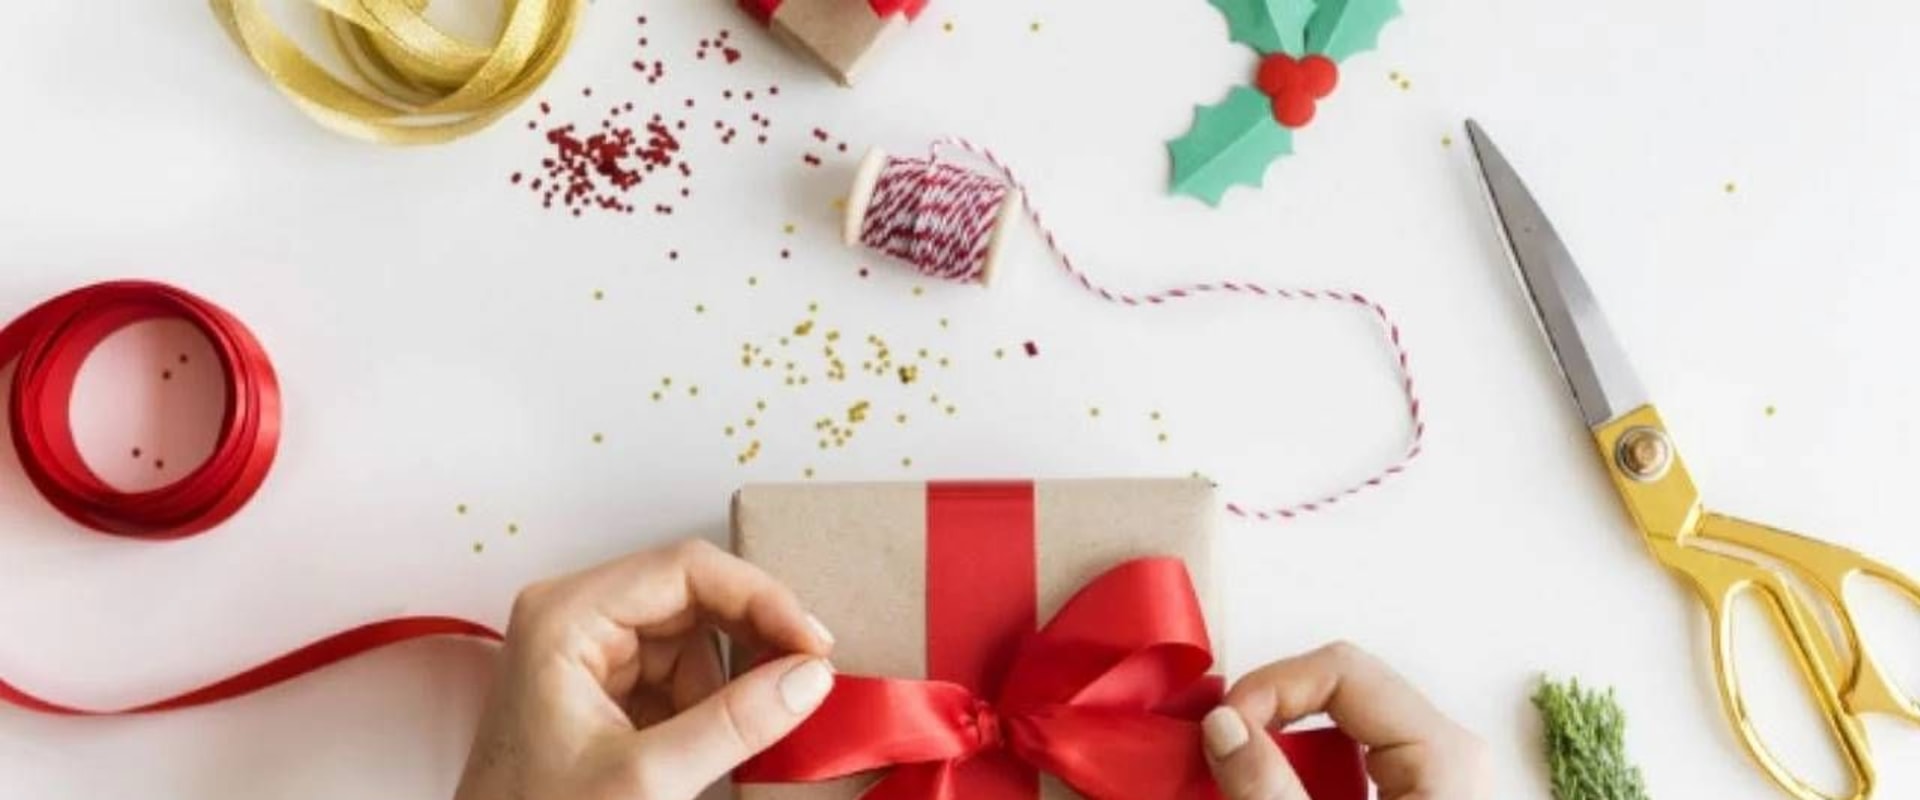 Are christmas gifts exempt from inheritance tax?